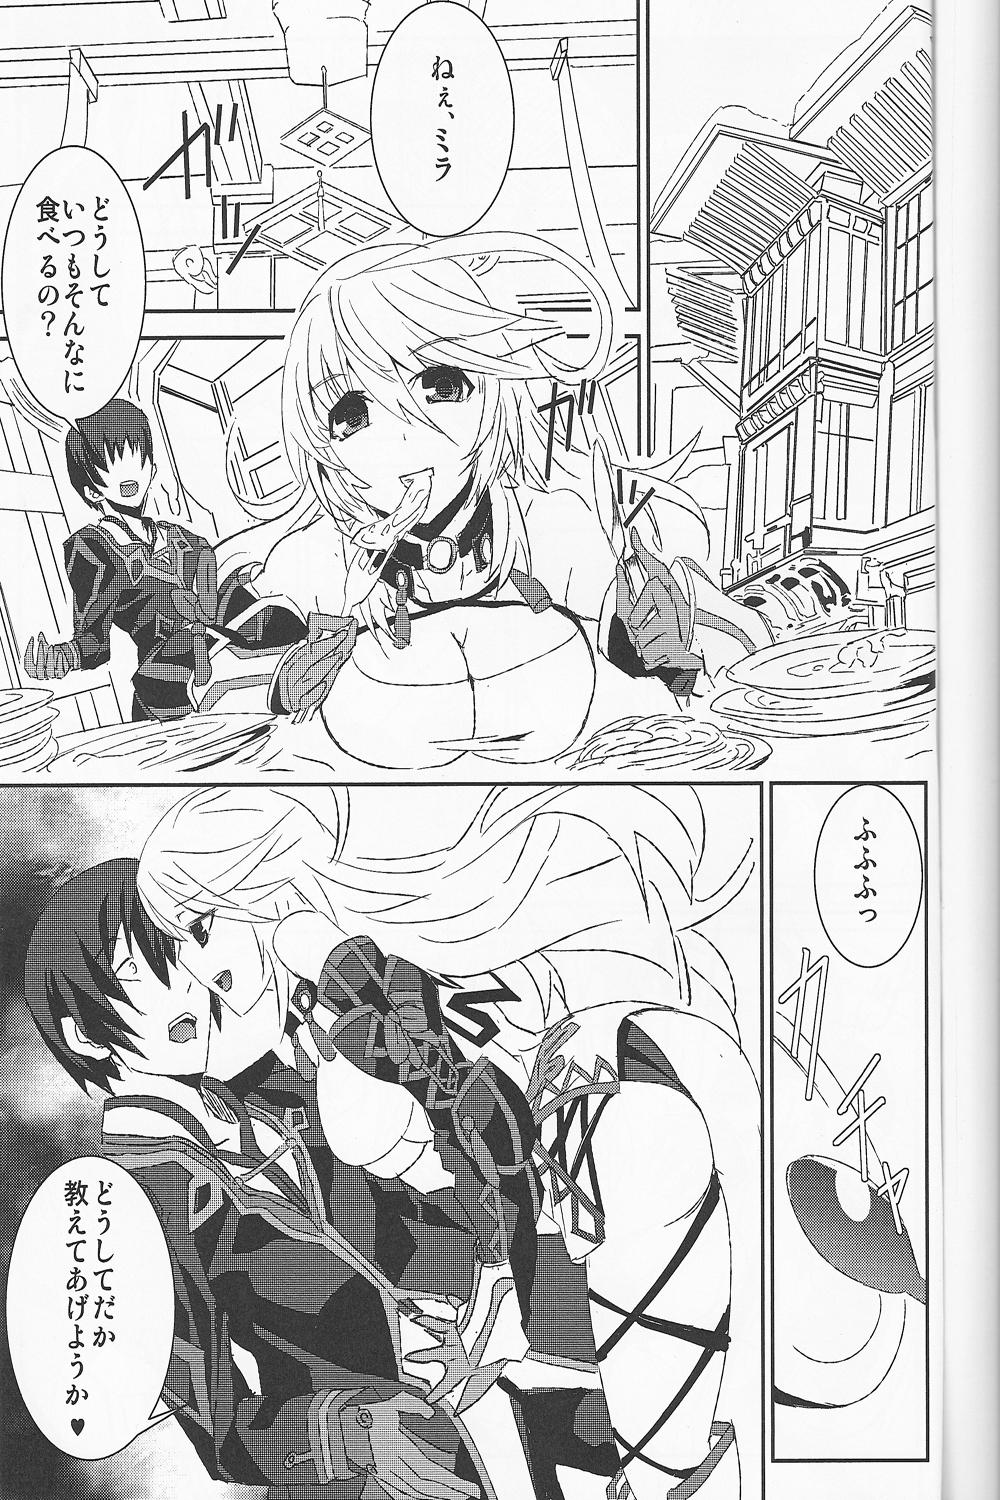 English Locus - Tales of xillia Police - Page 2